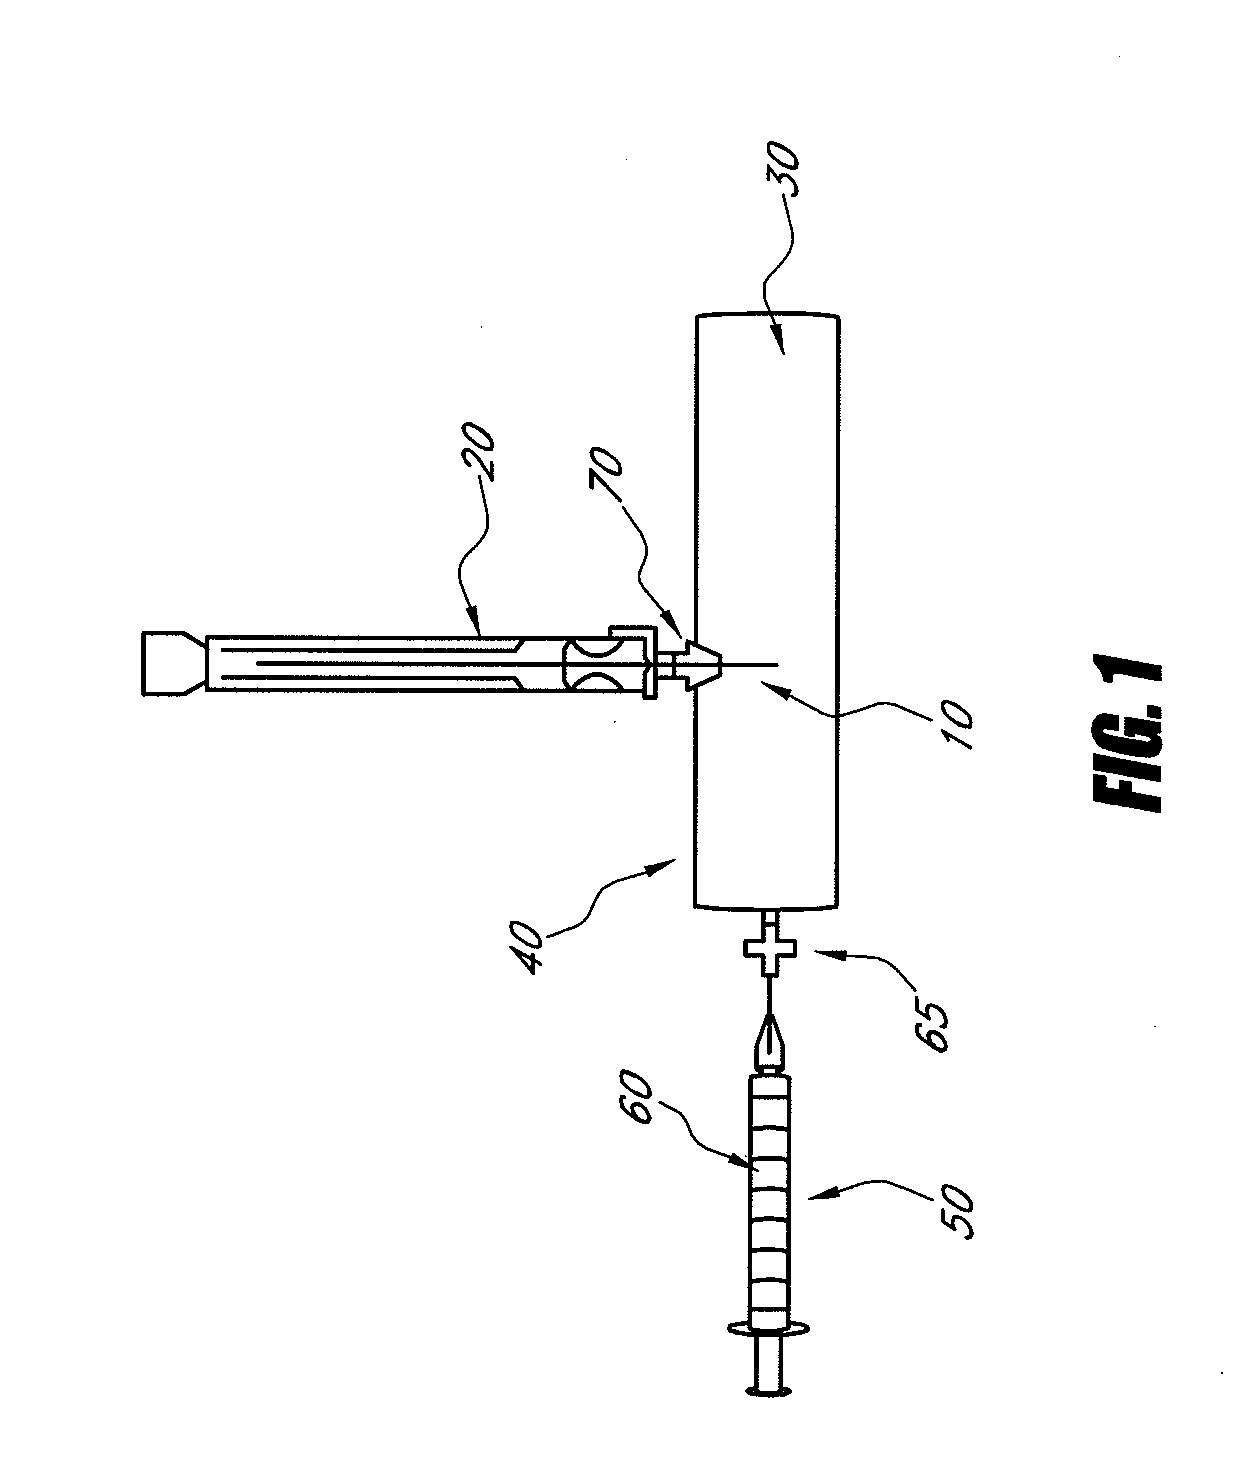 Device and methods for calibrating analyte sensors